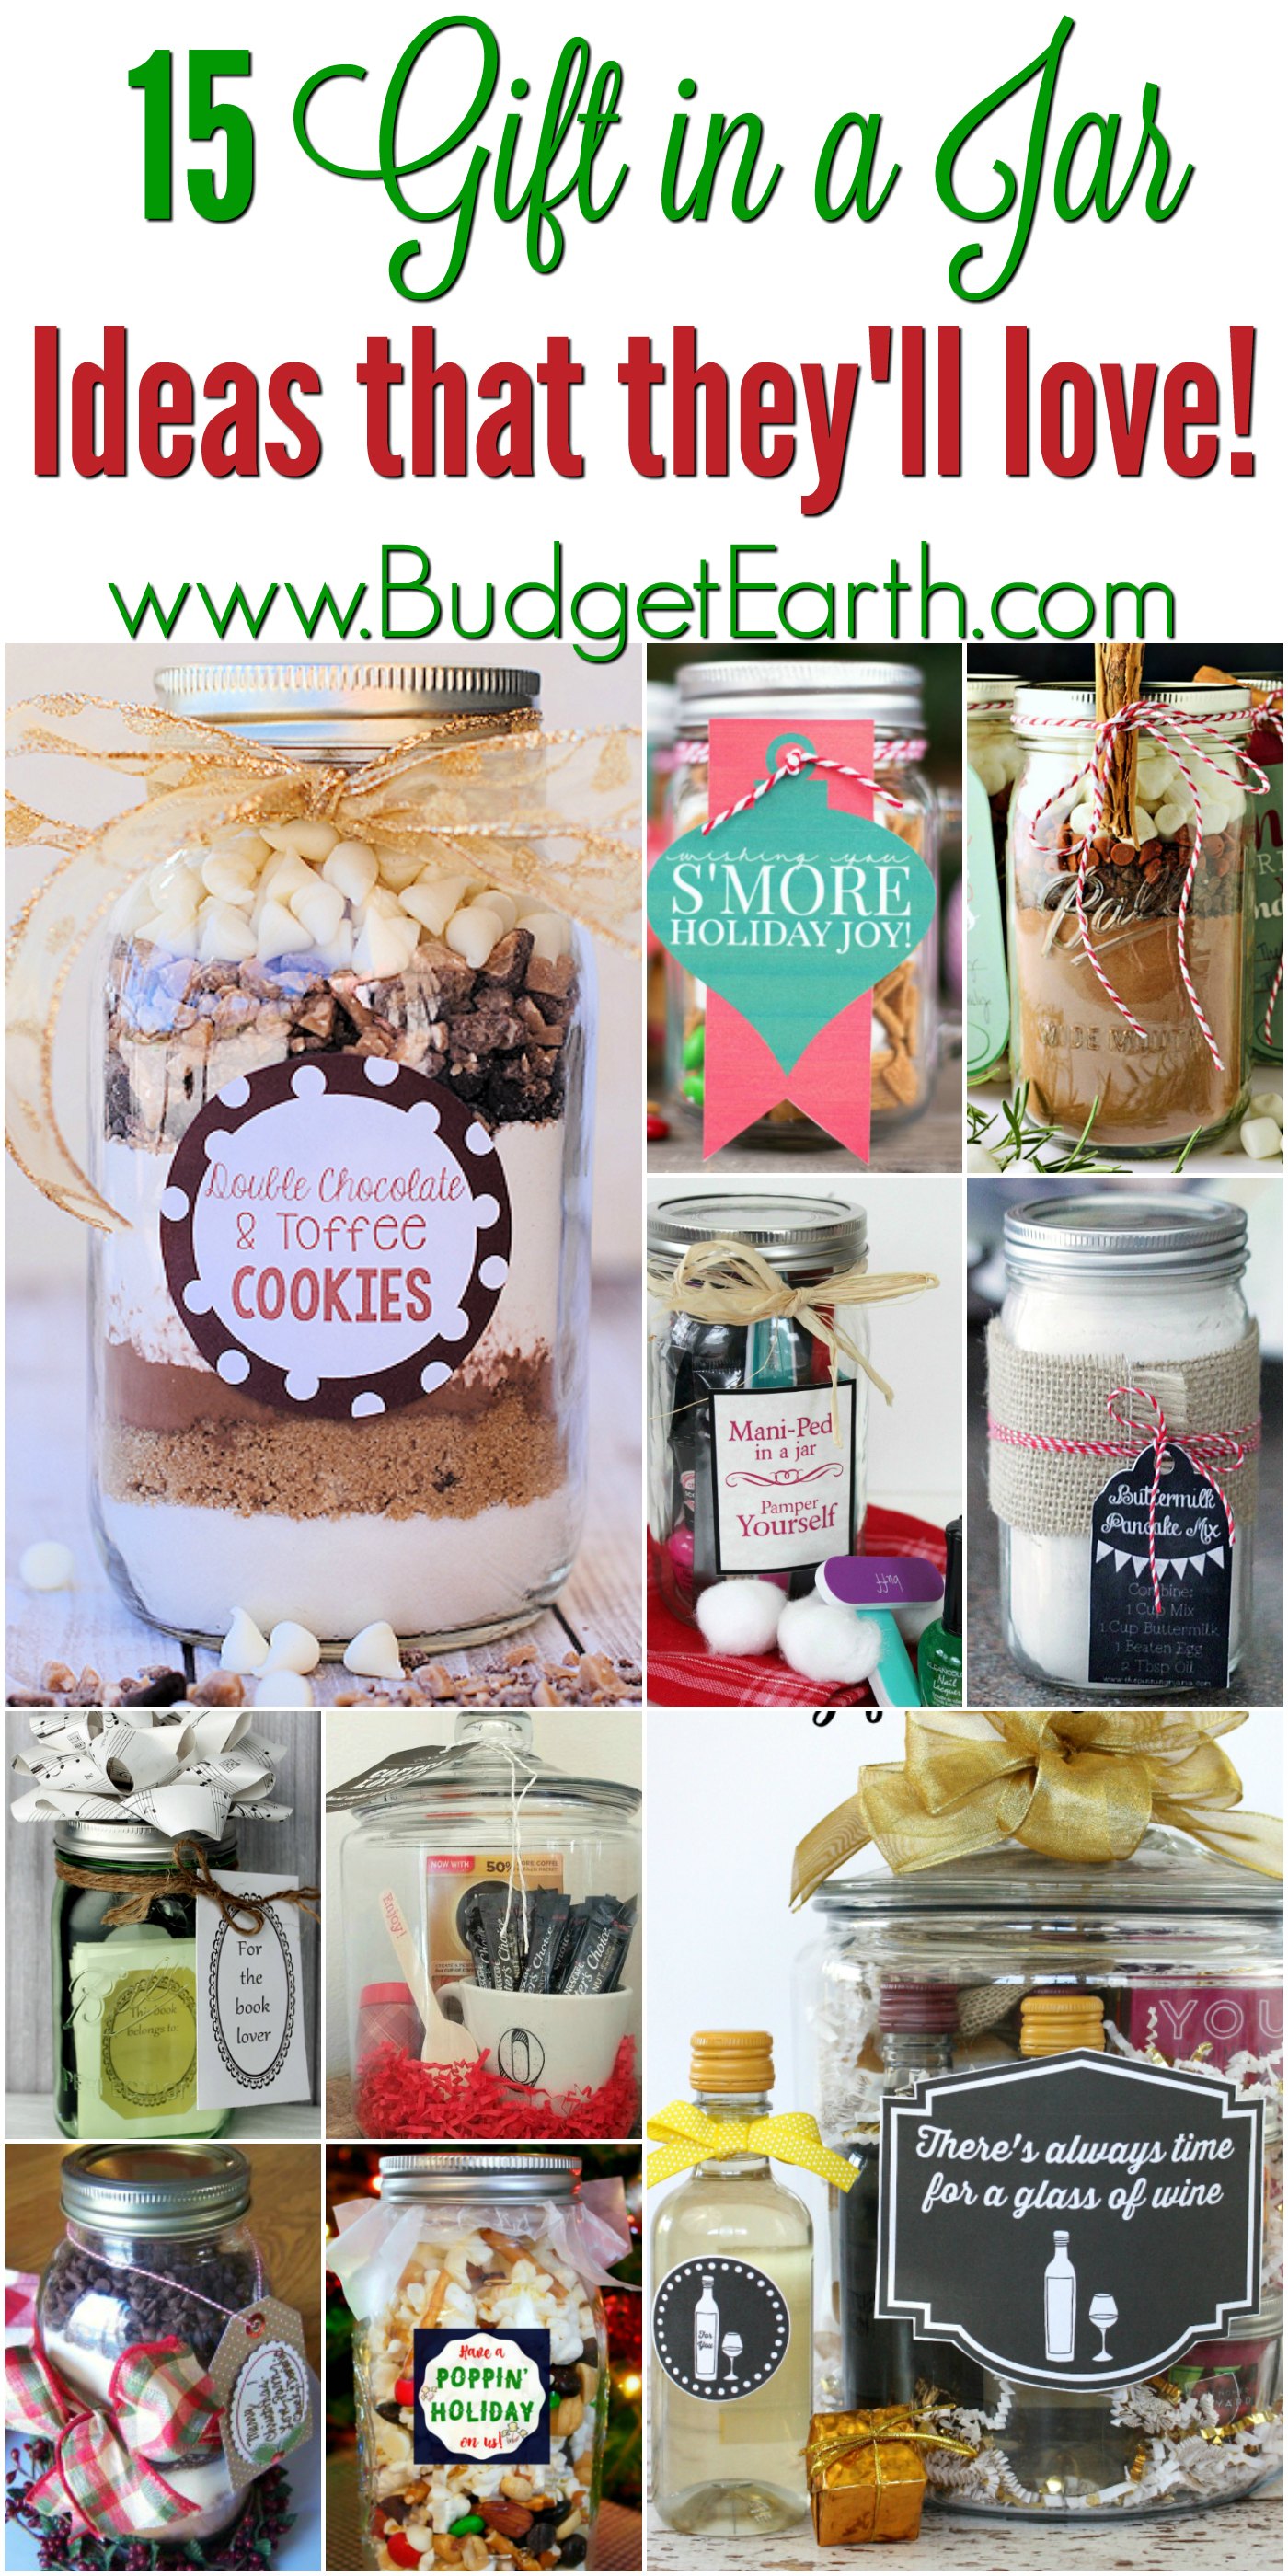 Looking for gift ideas for friends & family on your holiday list? Check out these 15 Gift in a Jar projects everyone is sure to love!